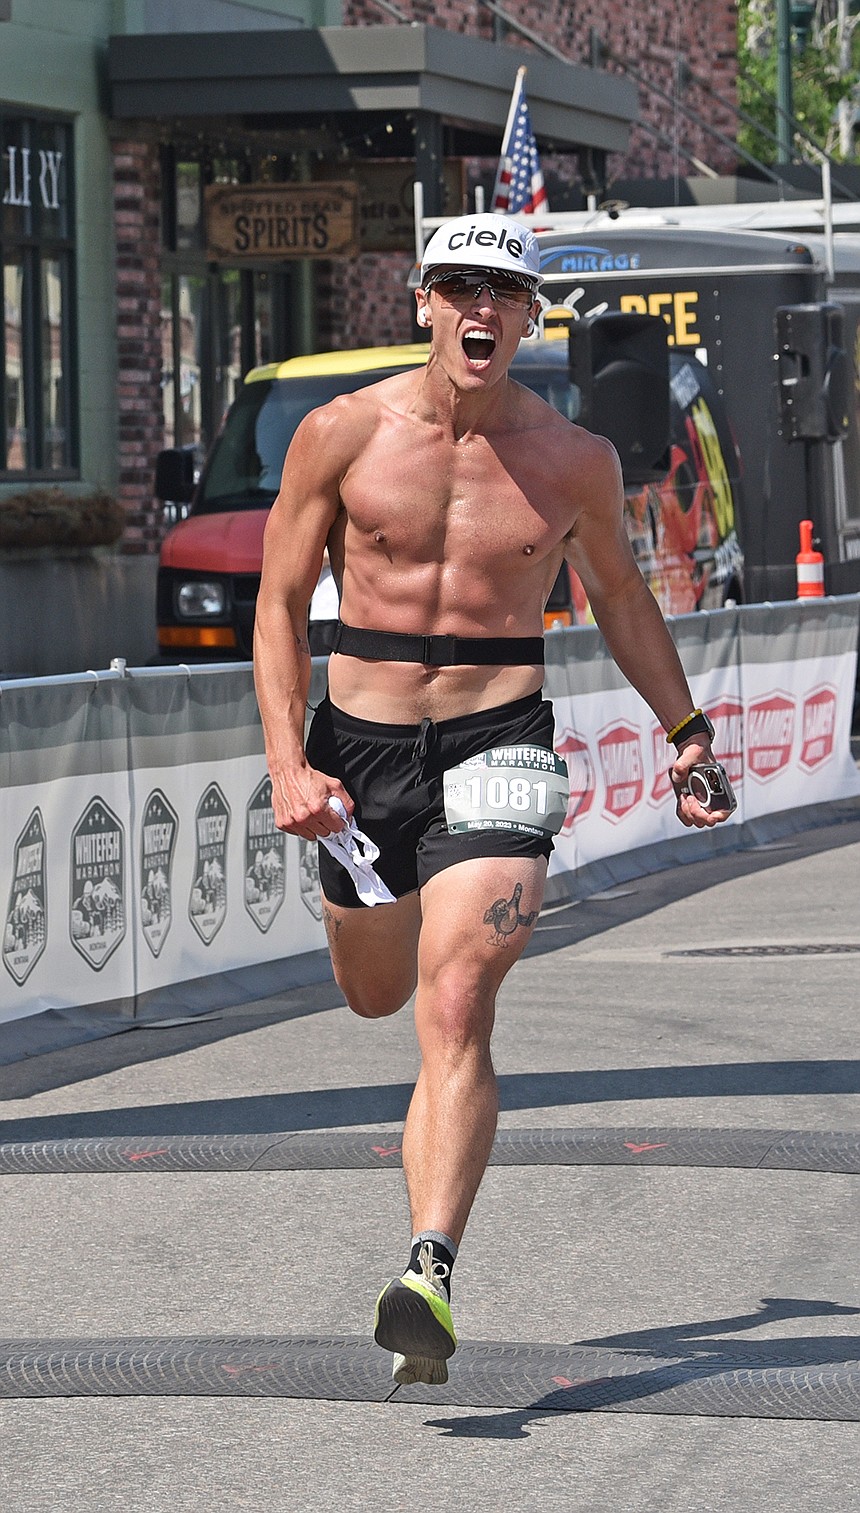 Nathan Peterson of Whitefish roars while crossing the finish line of the marathon. (Julie Engler/Whitefish Pilot)